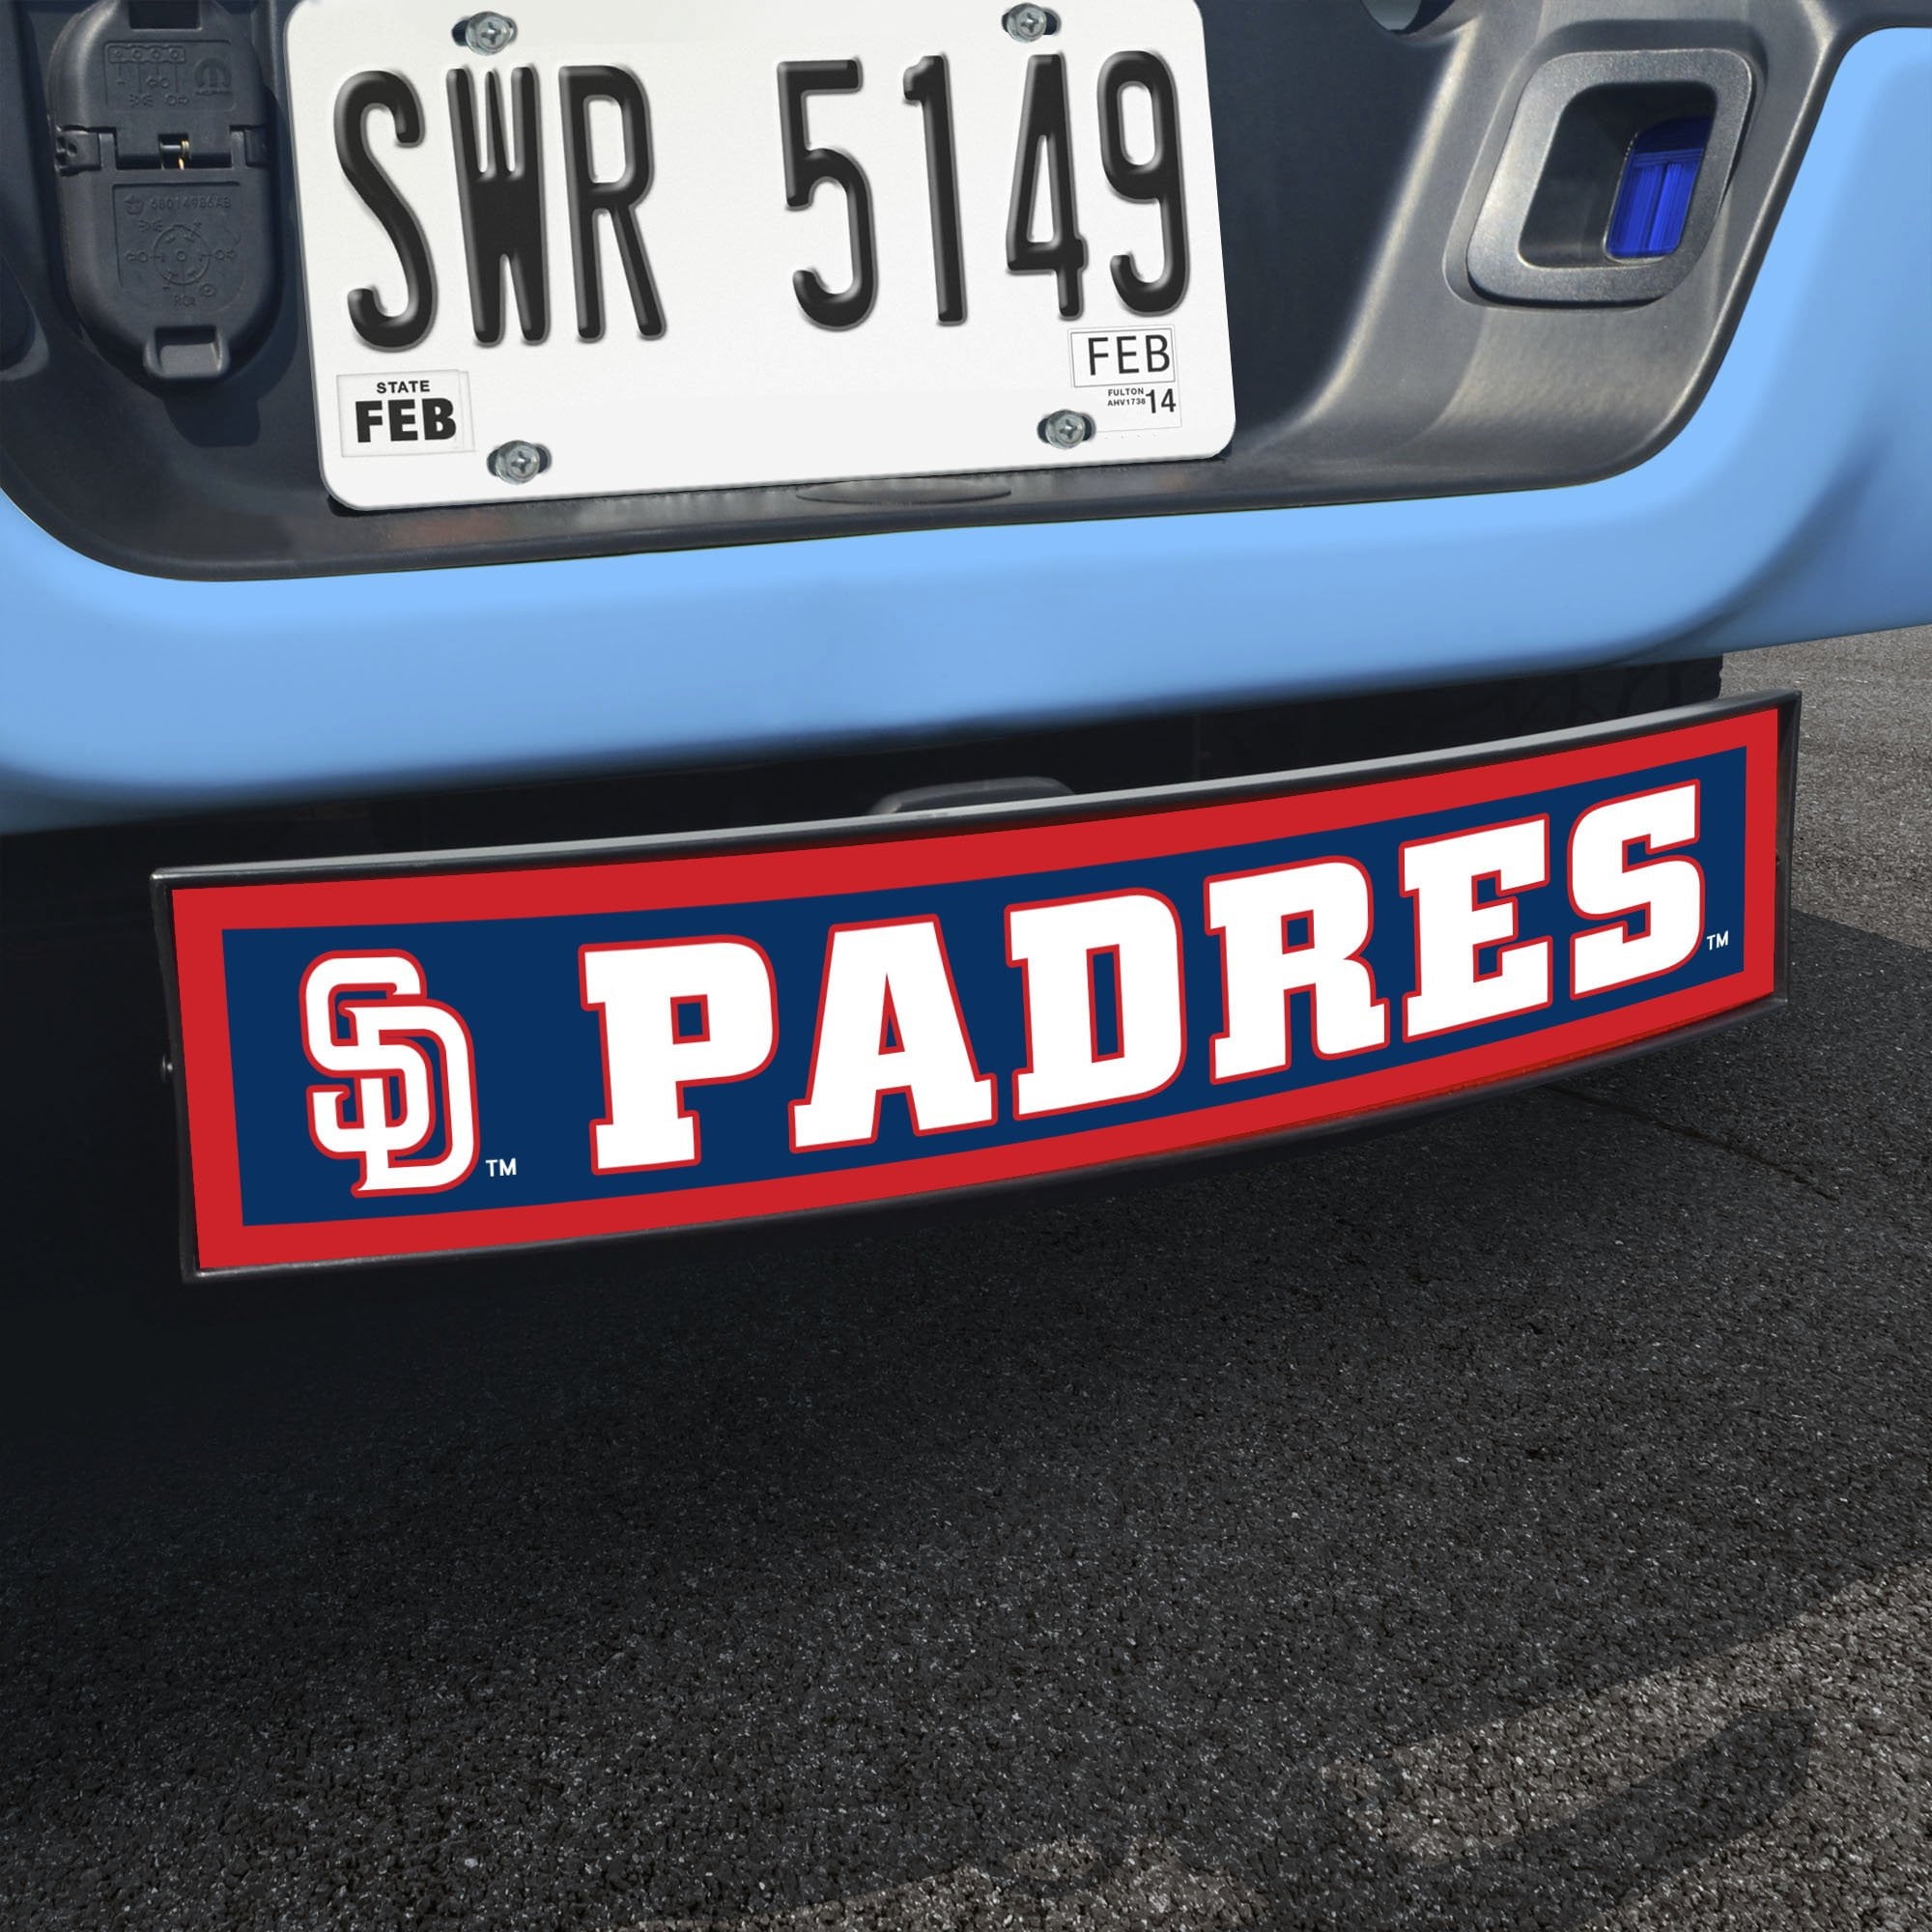 San Diego Padres Light Up Hitch Cover 21